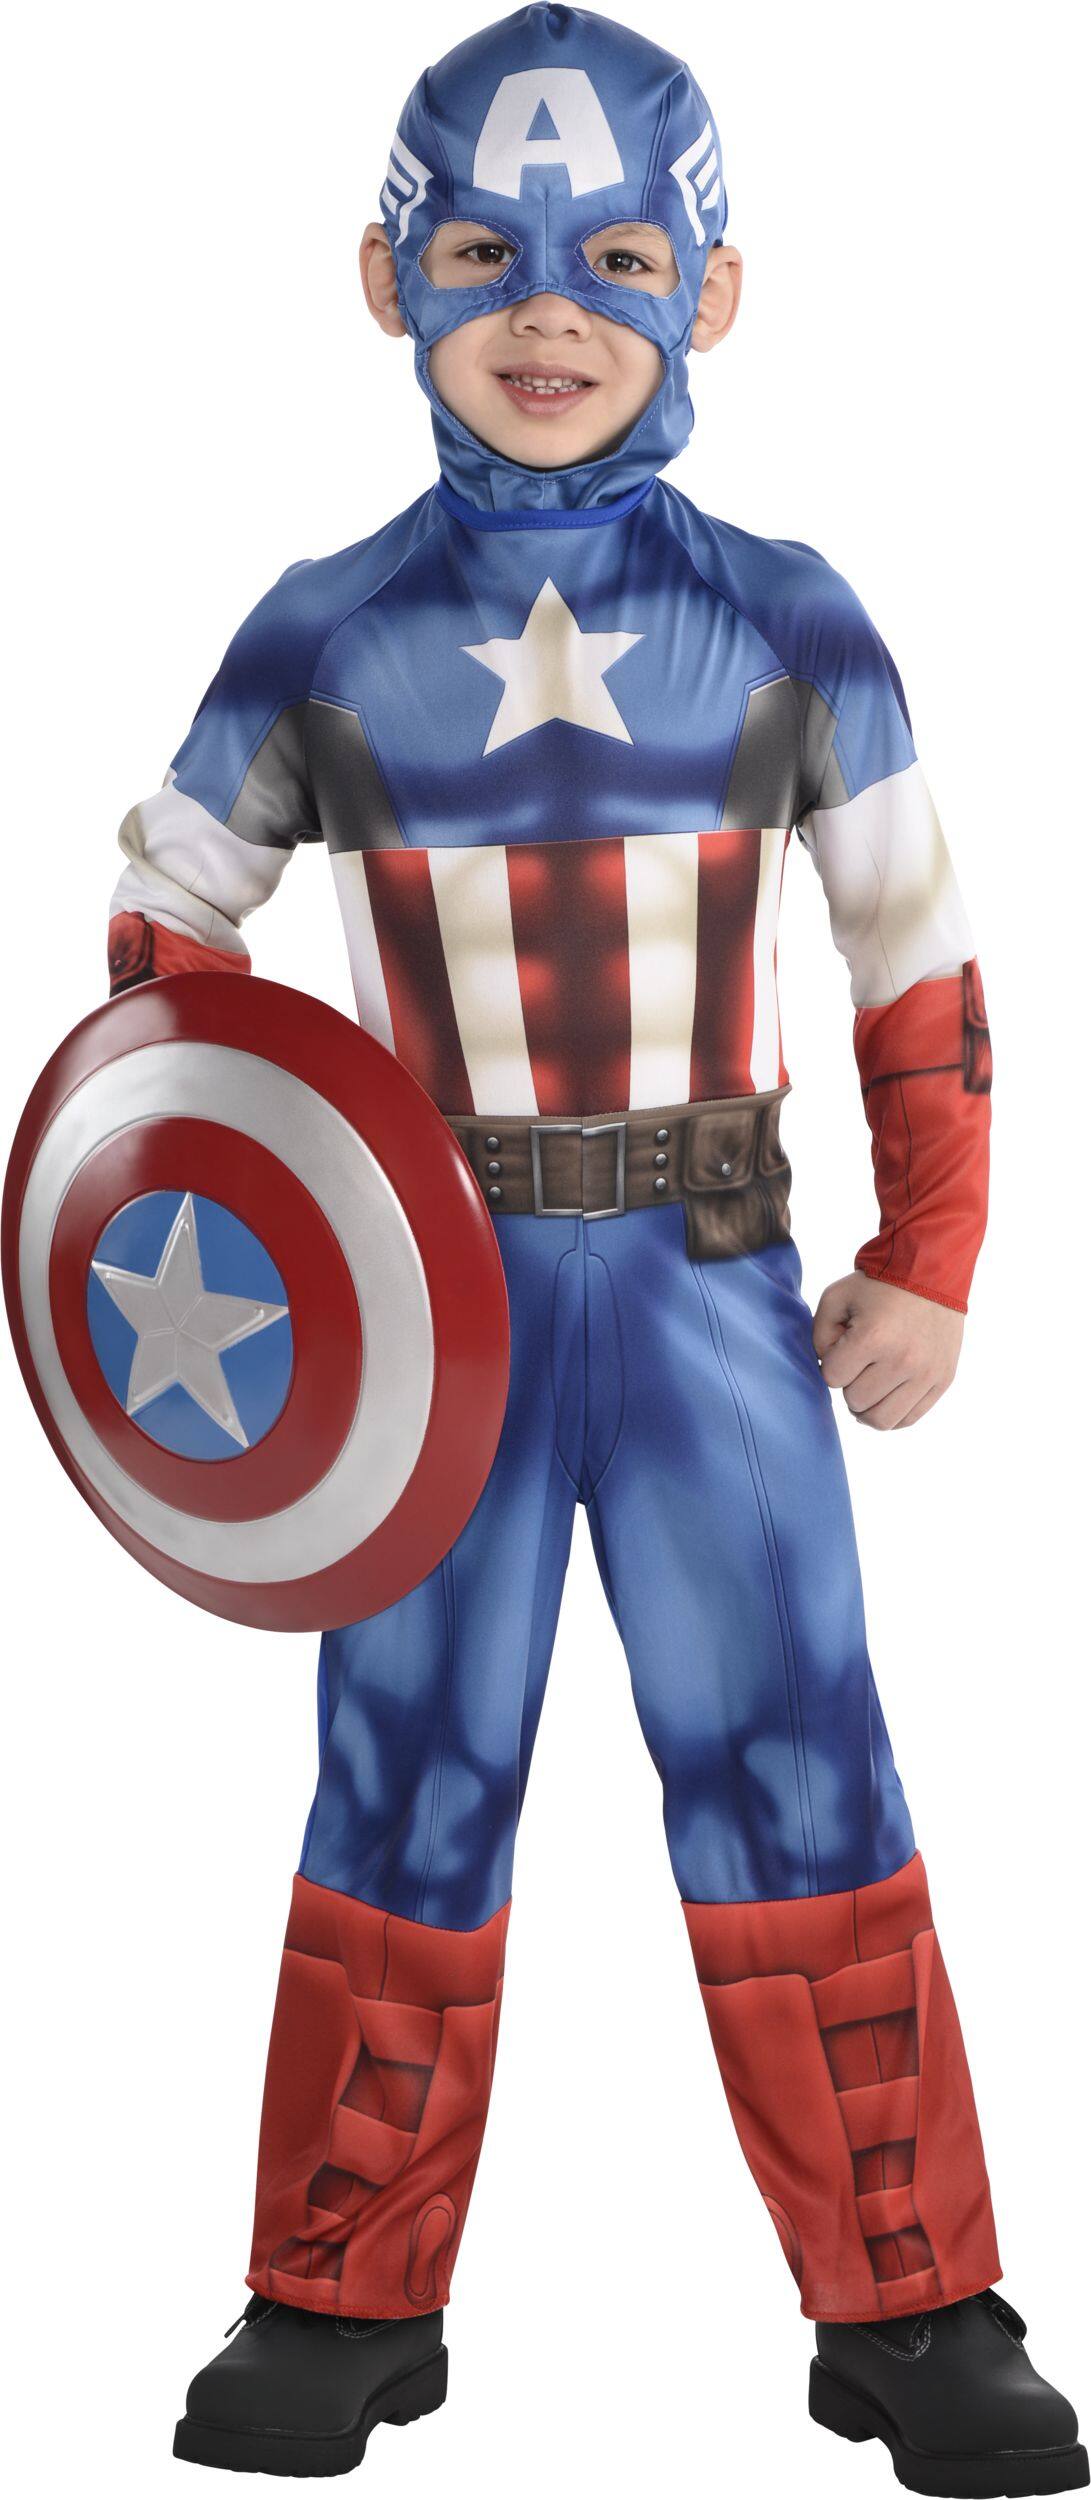 Kids' Marvel Captain America Halloween Costume, More Options Available ...